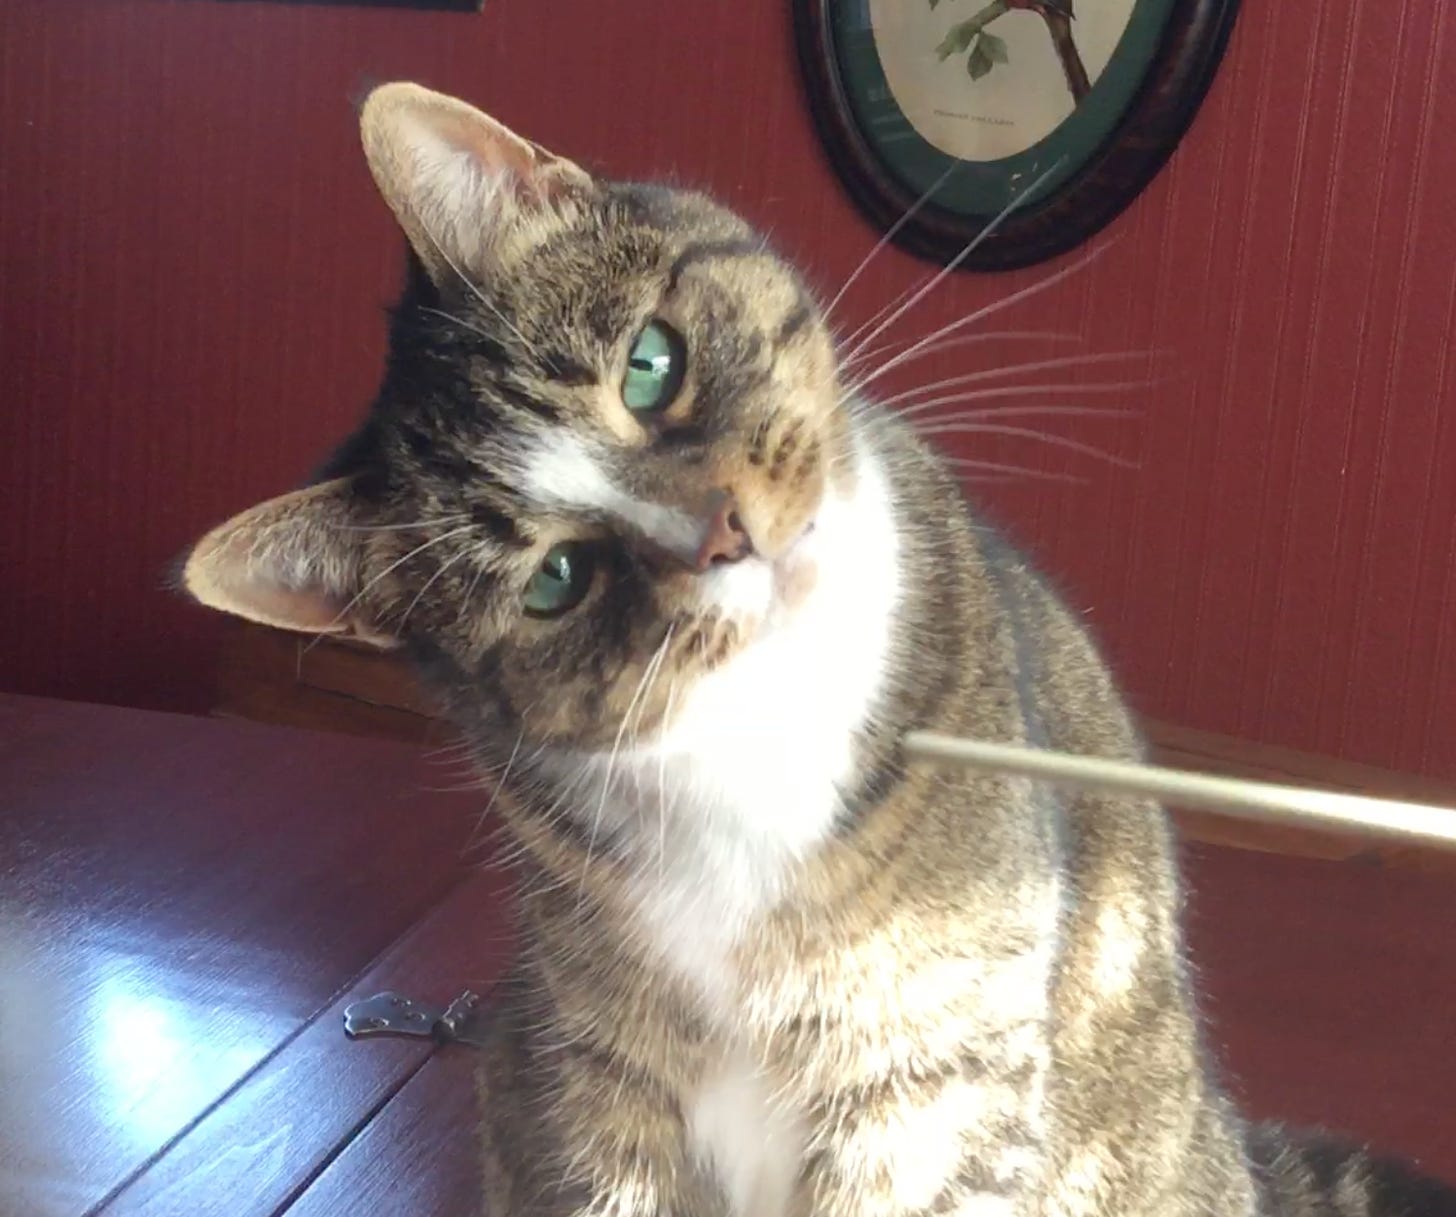 Stella the cat, fascinated by a conductor's baton.